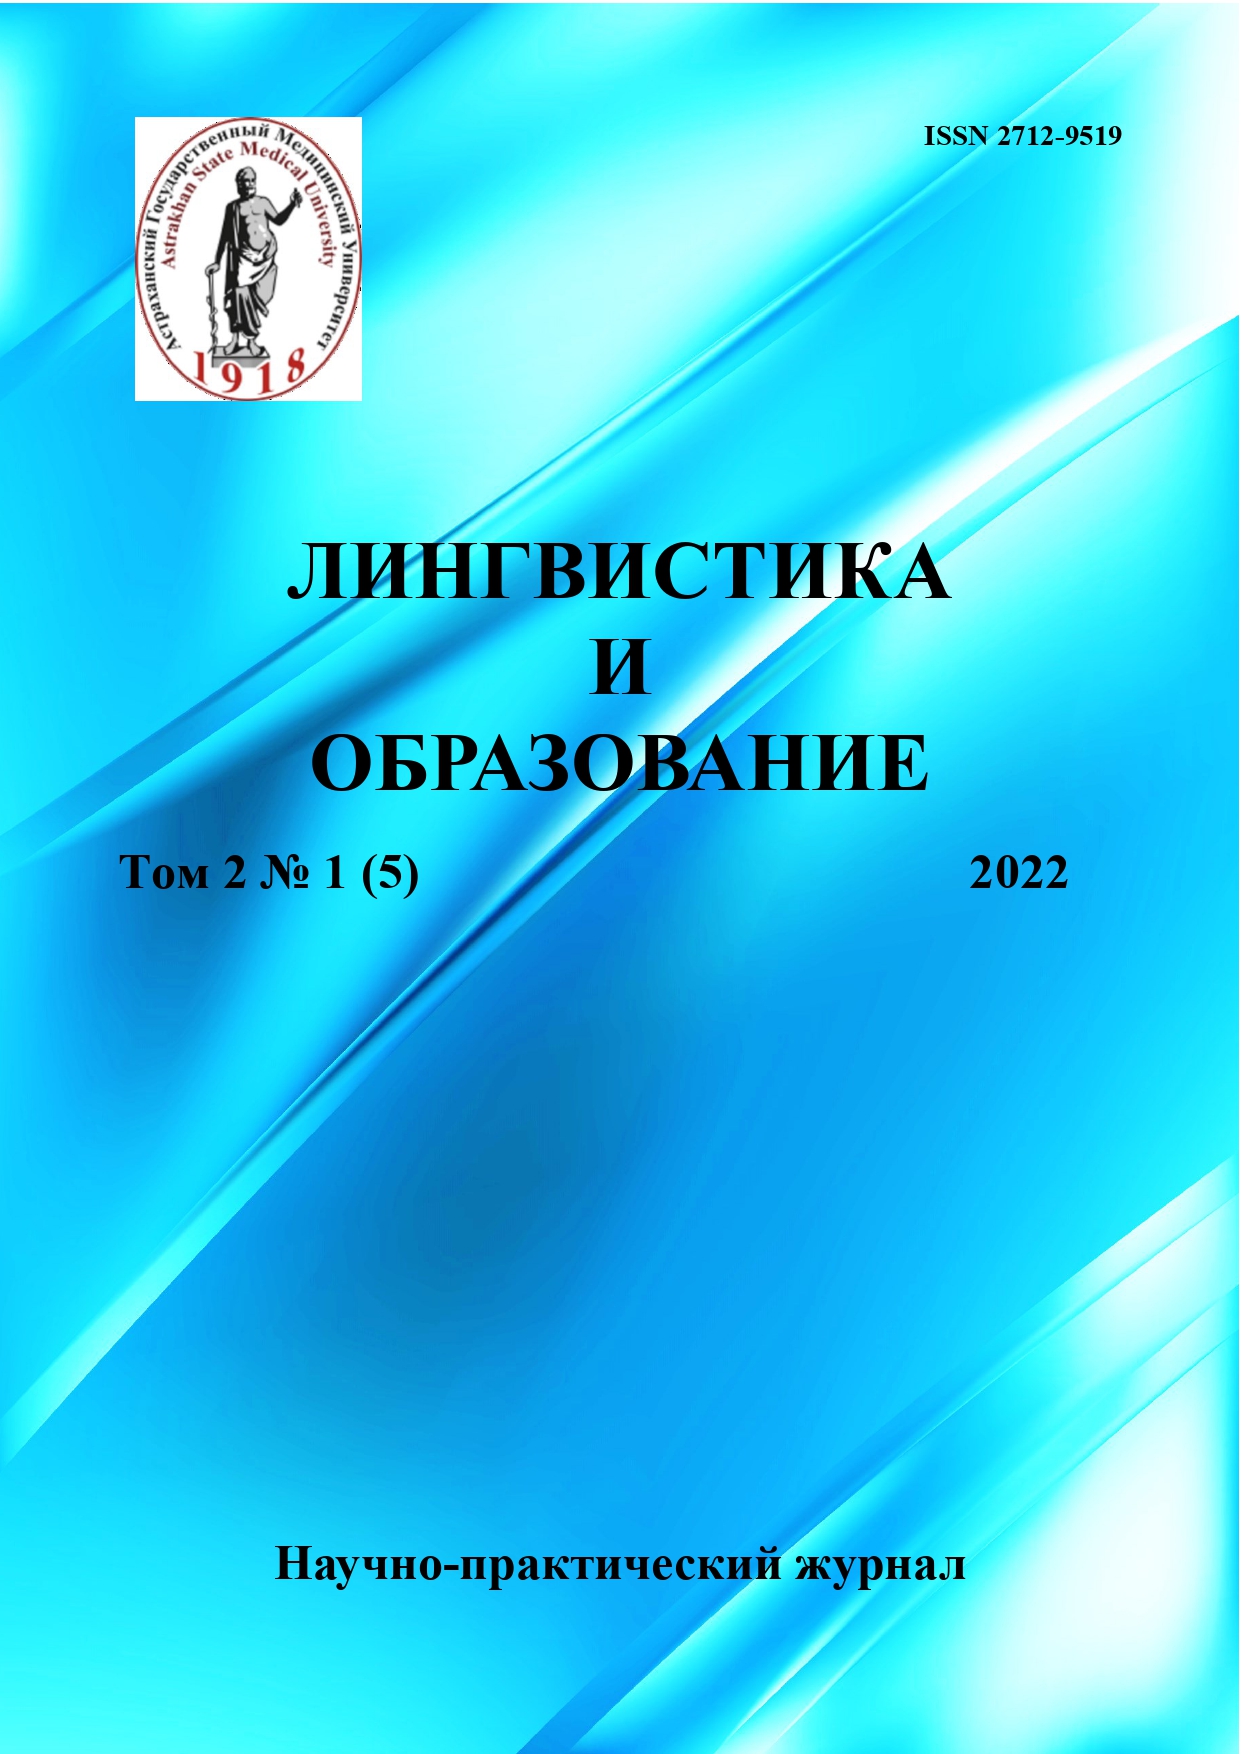                         CONCEPTUALIZATION OF VETERINARIAN / KONOVAL’S CHARACTER IN RUSSIAN FICTION AS A STAGE OF RESEARCH OF THE DISCURSIVE PERSONALITY OF VETERINARIAN
            